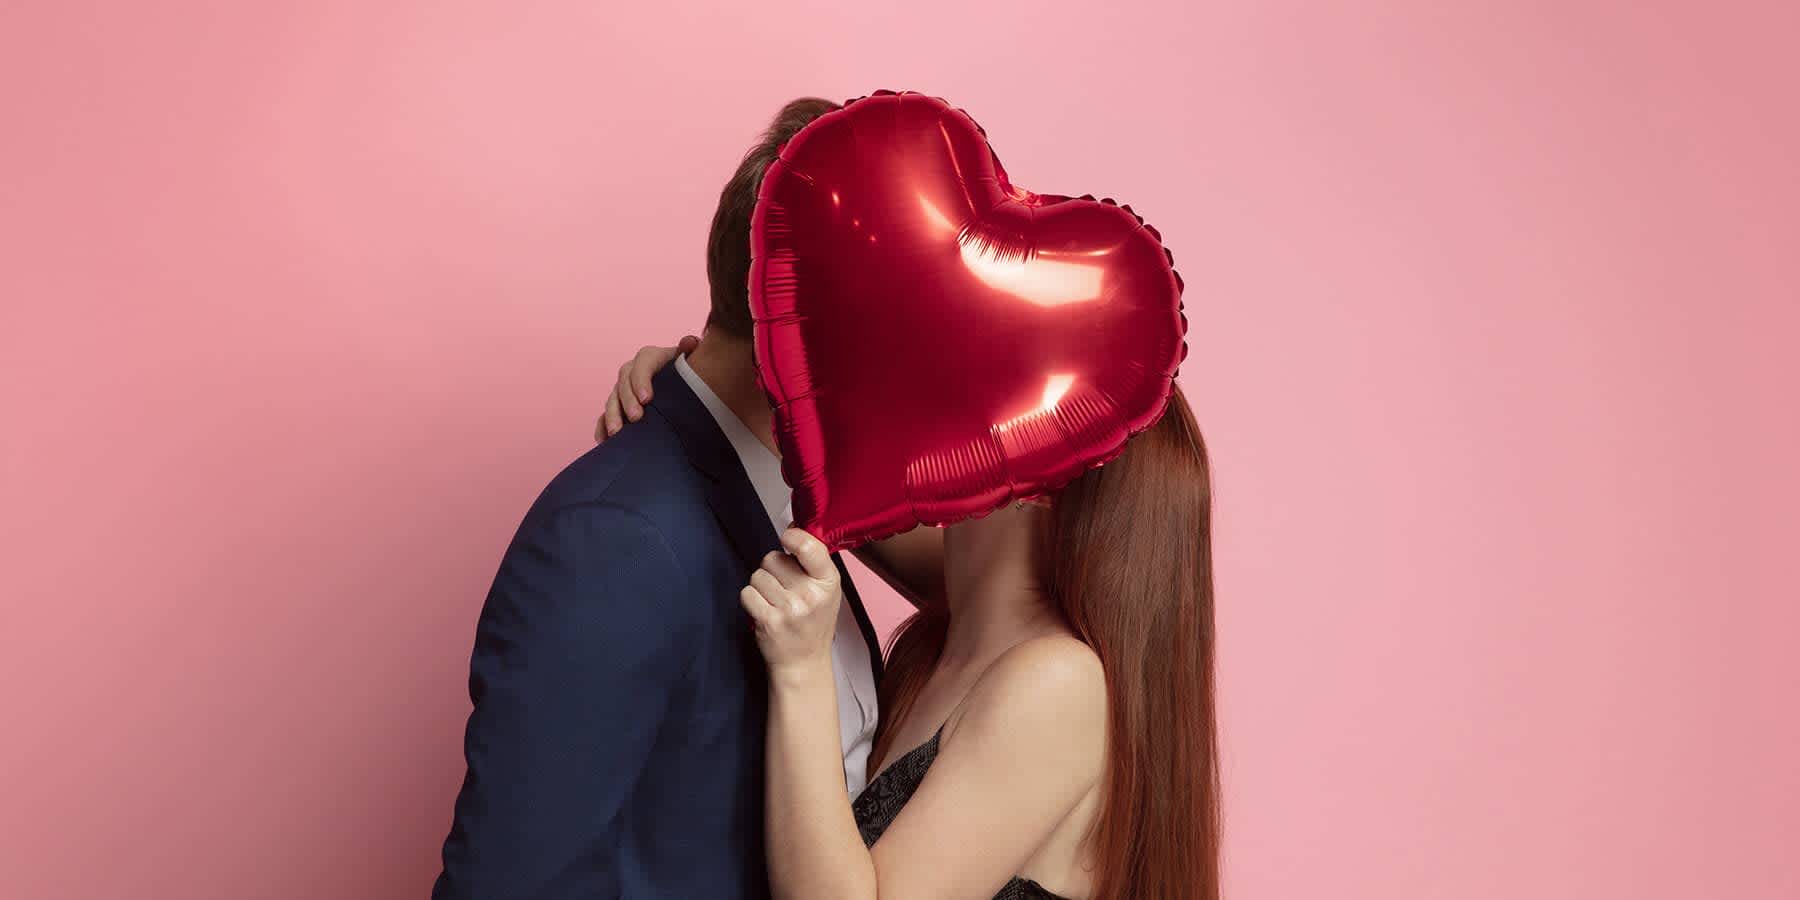 Couple embracing against a pink background to represent good sexual hygiene